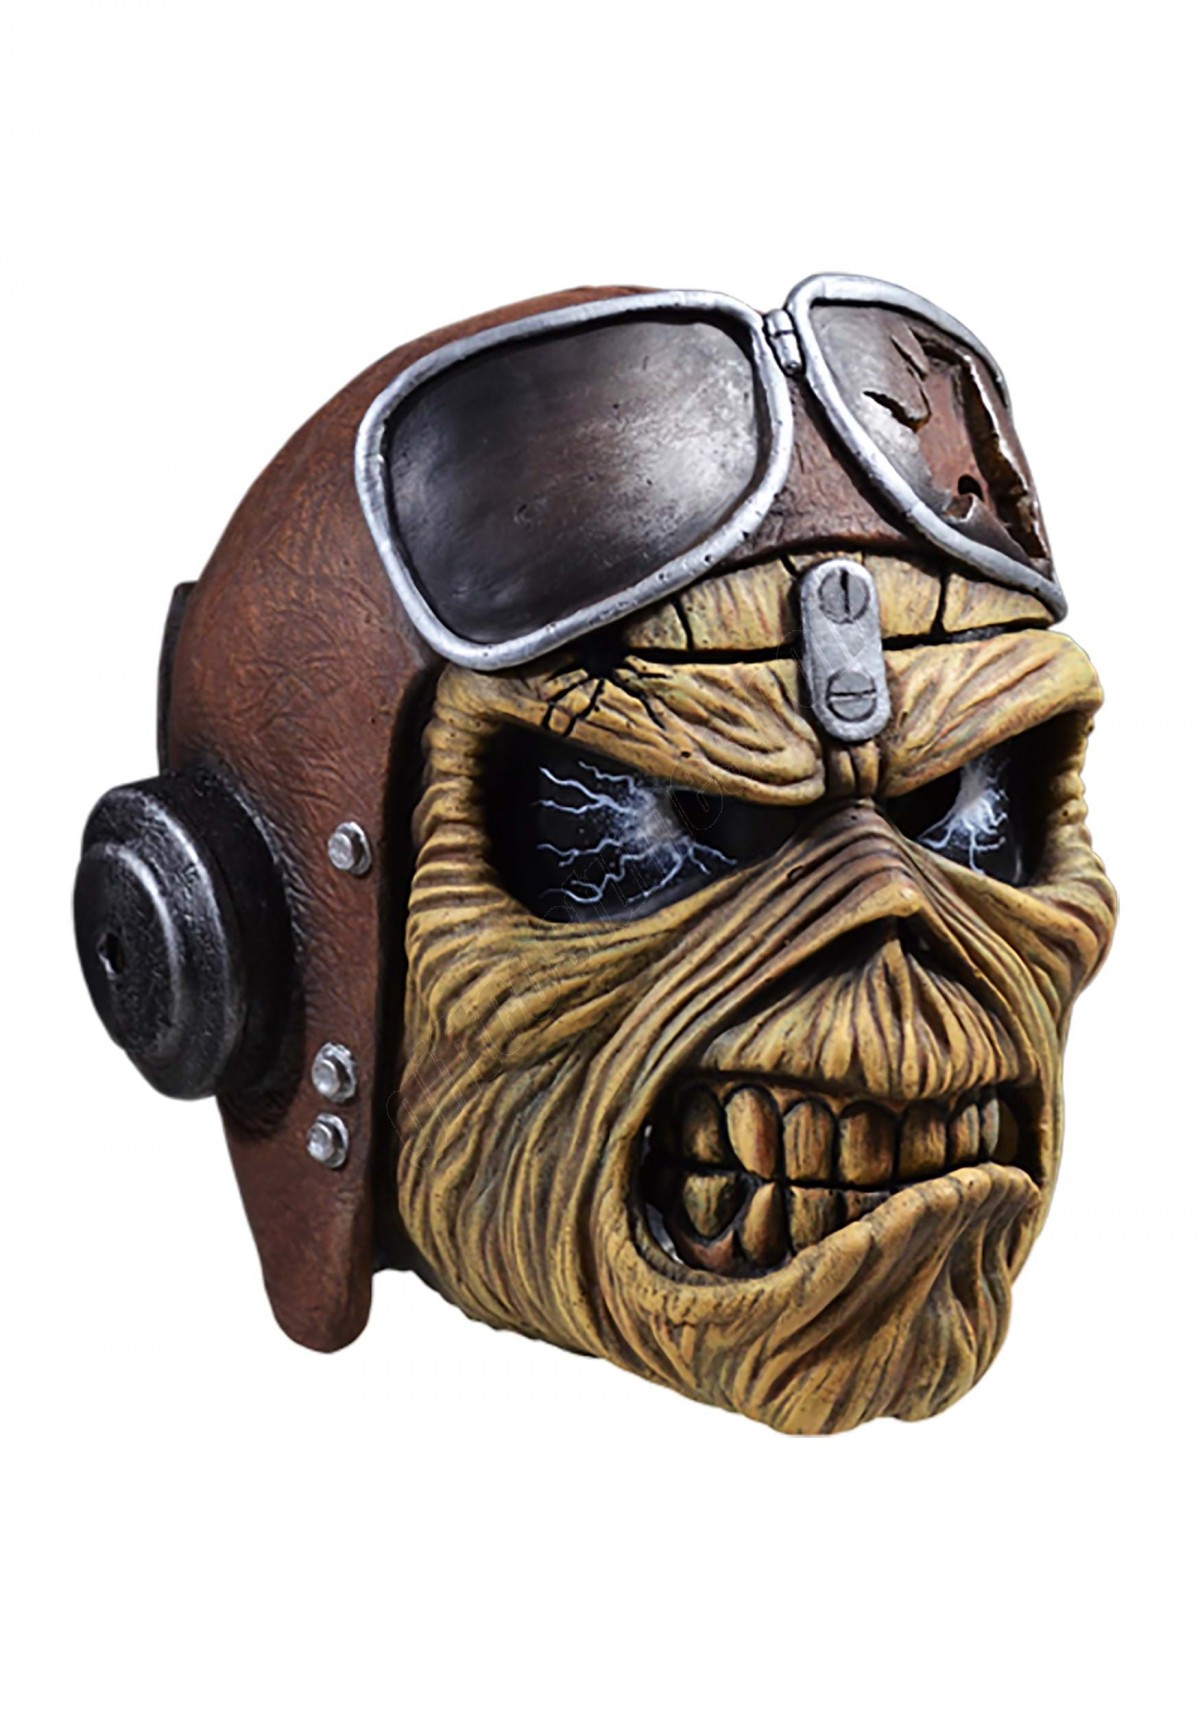 Iron Maiden Aces High Mask Promotions - -1